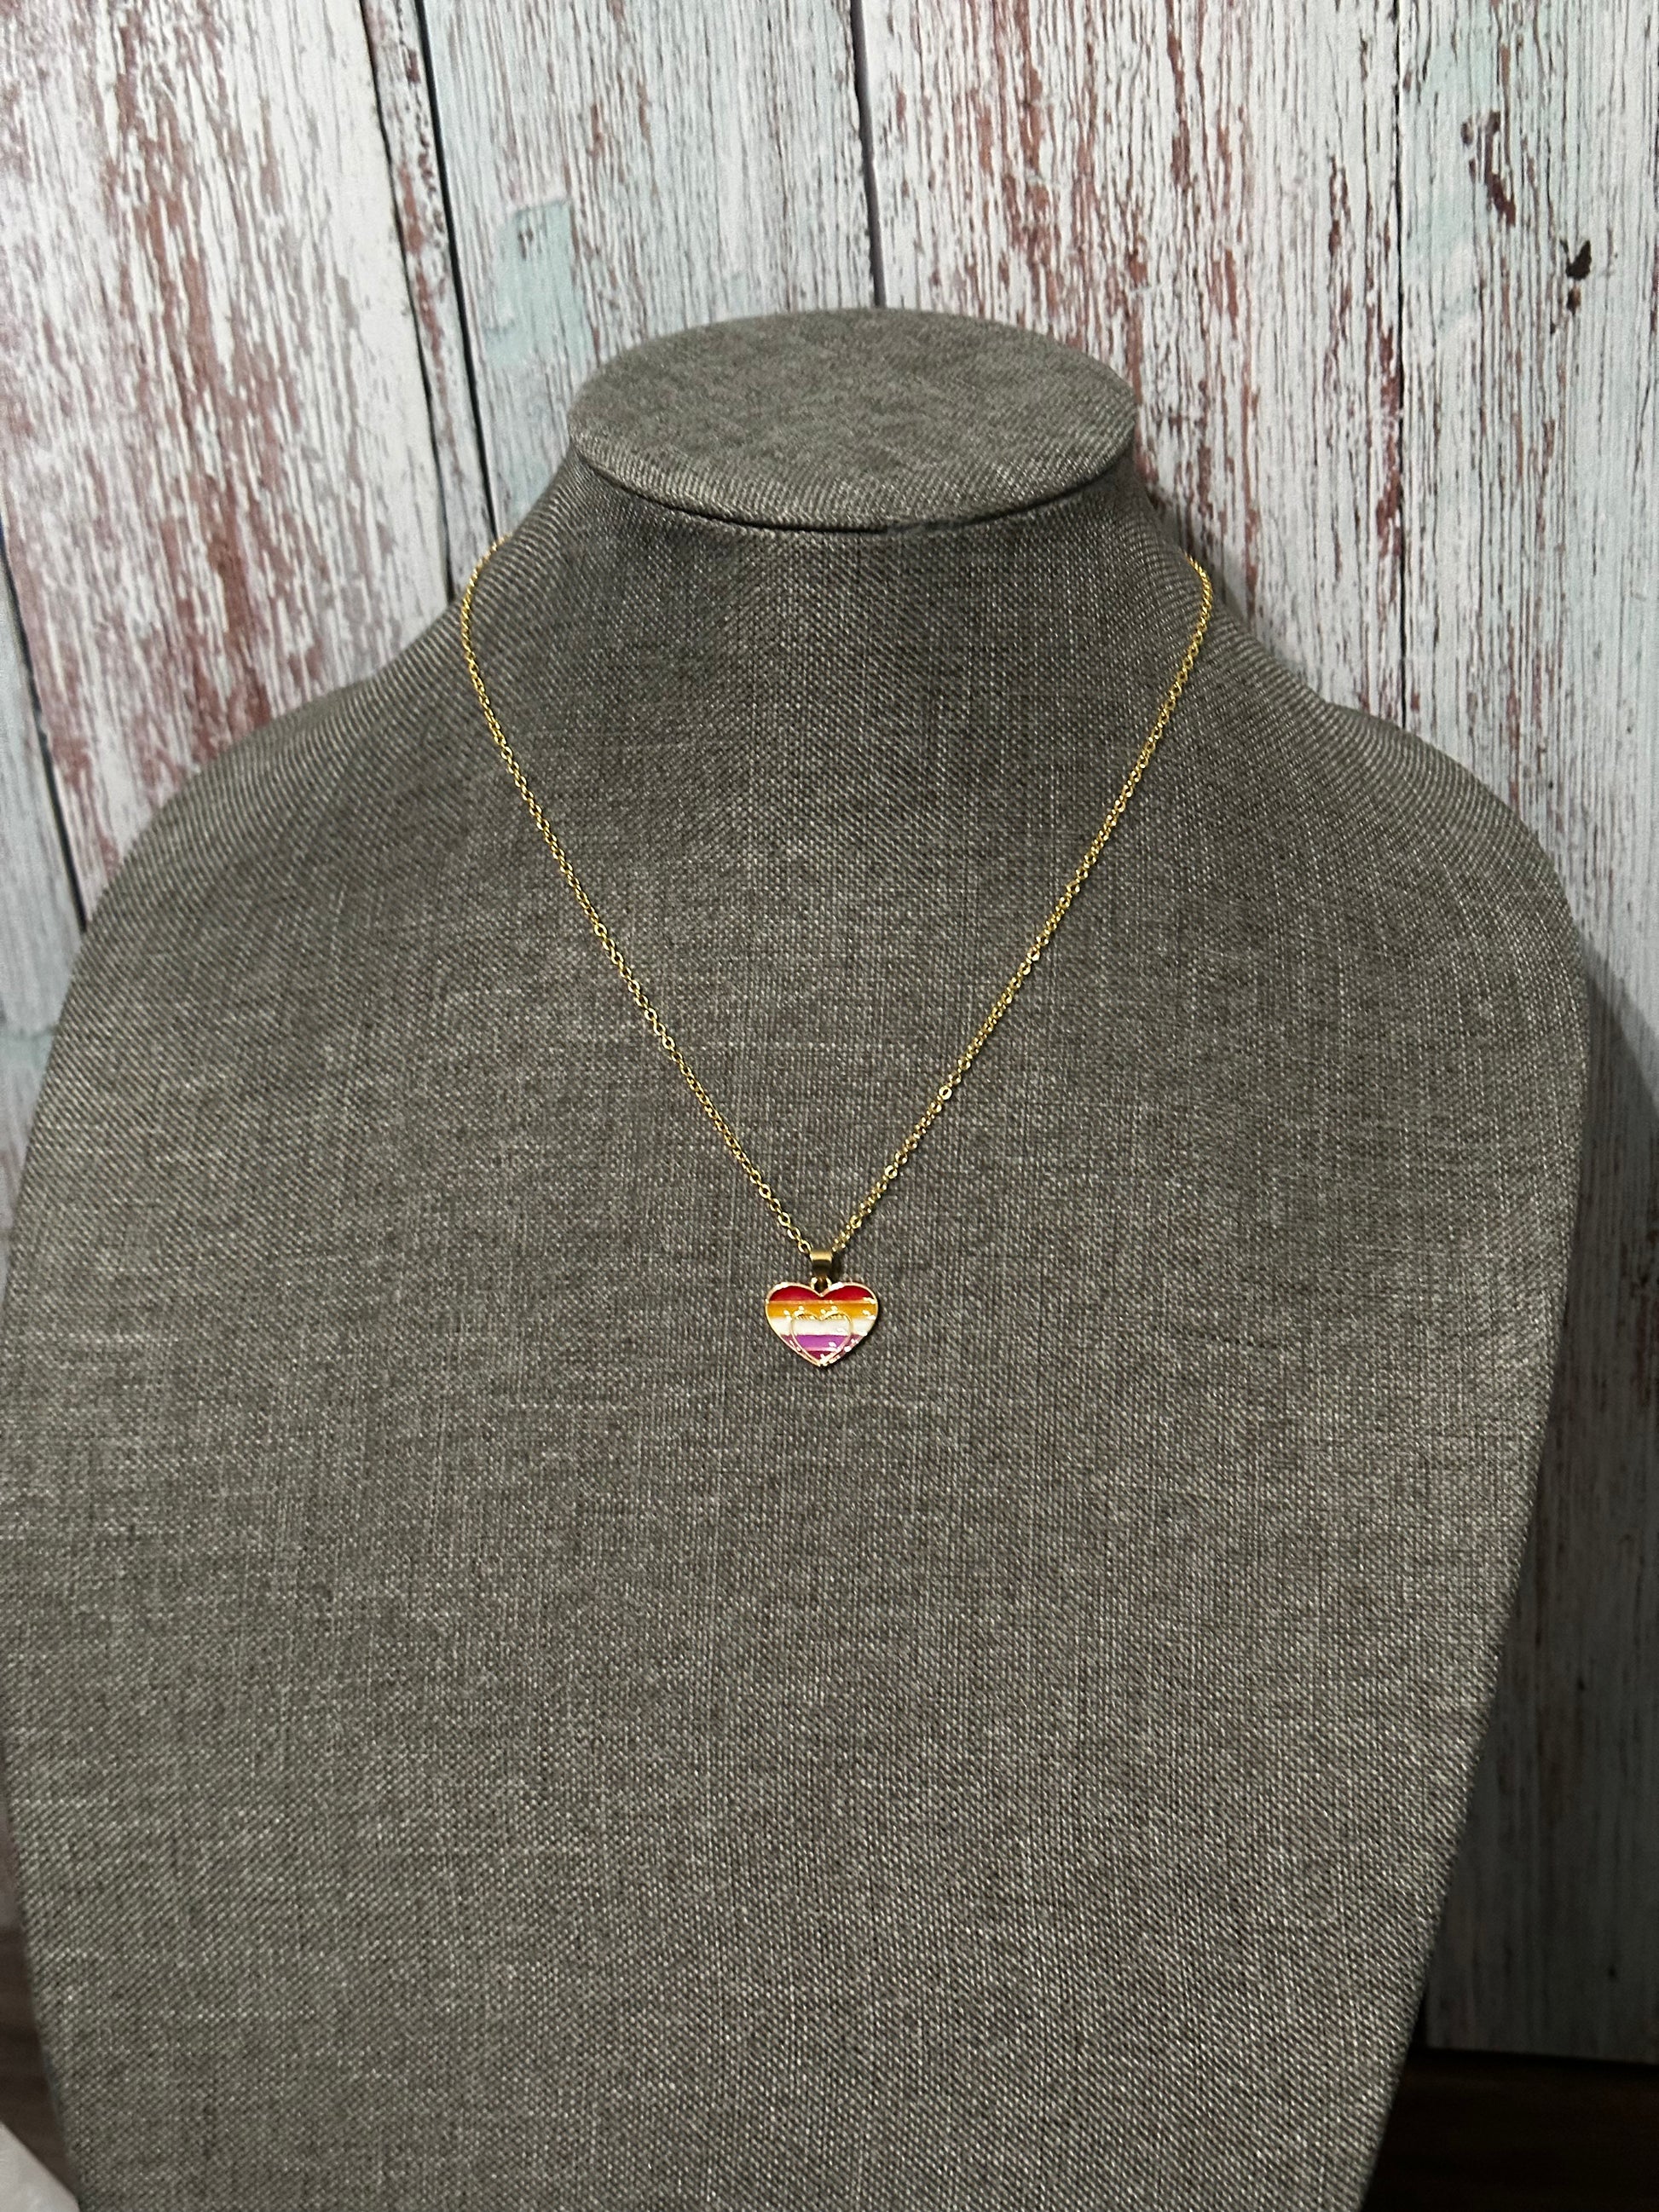 Black Cord WLW Rectangle Sunset Lesbian Flag Charm Necklace, Wholesale –  Fundraising For A Cause